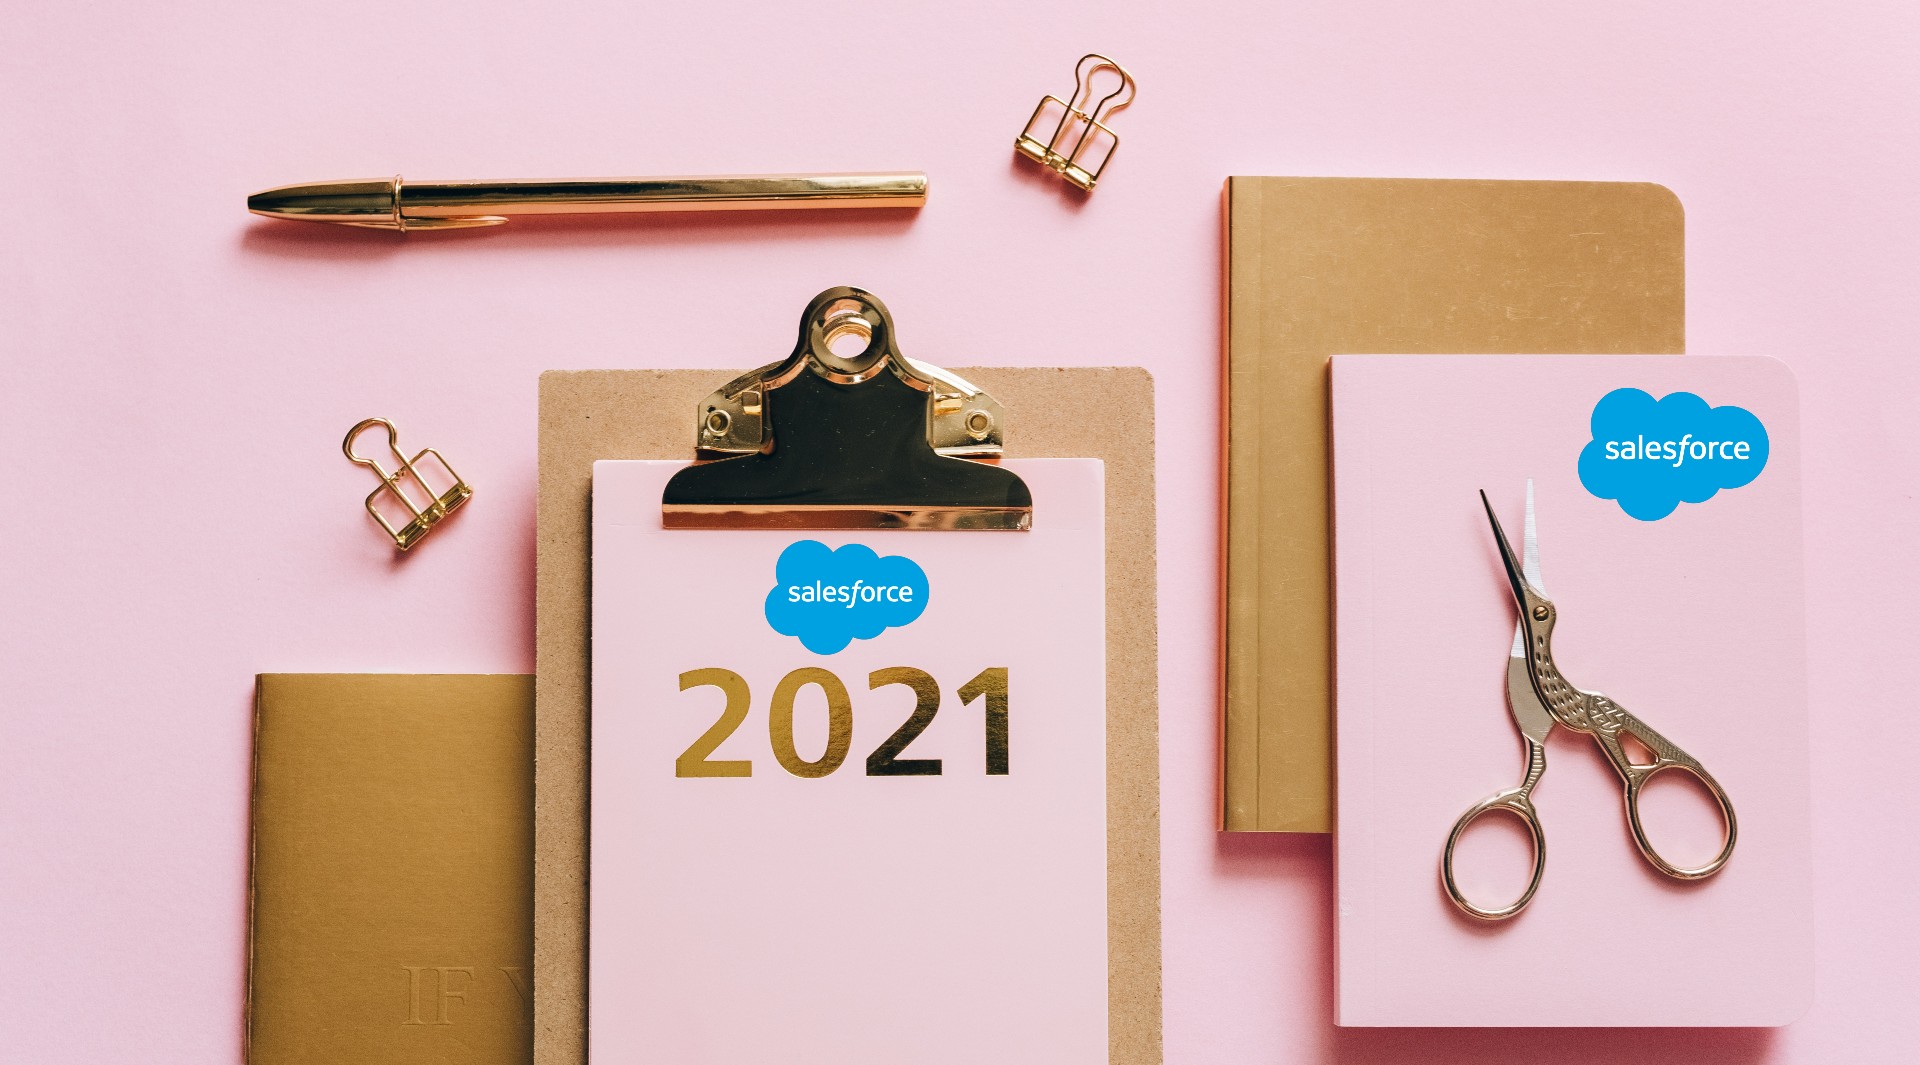 Why Do Businesses Need Salesforce In 2021?